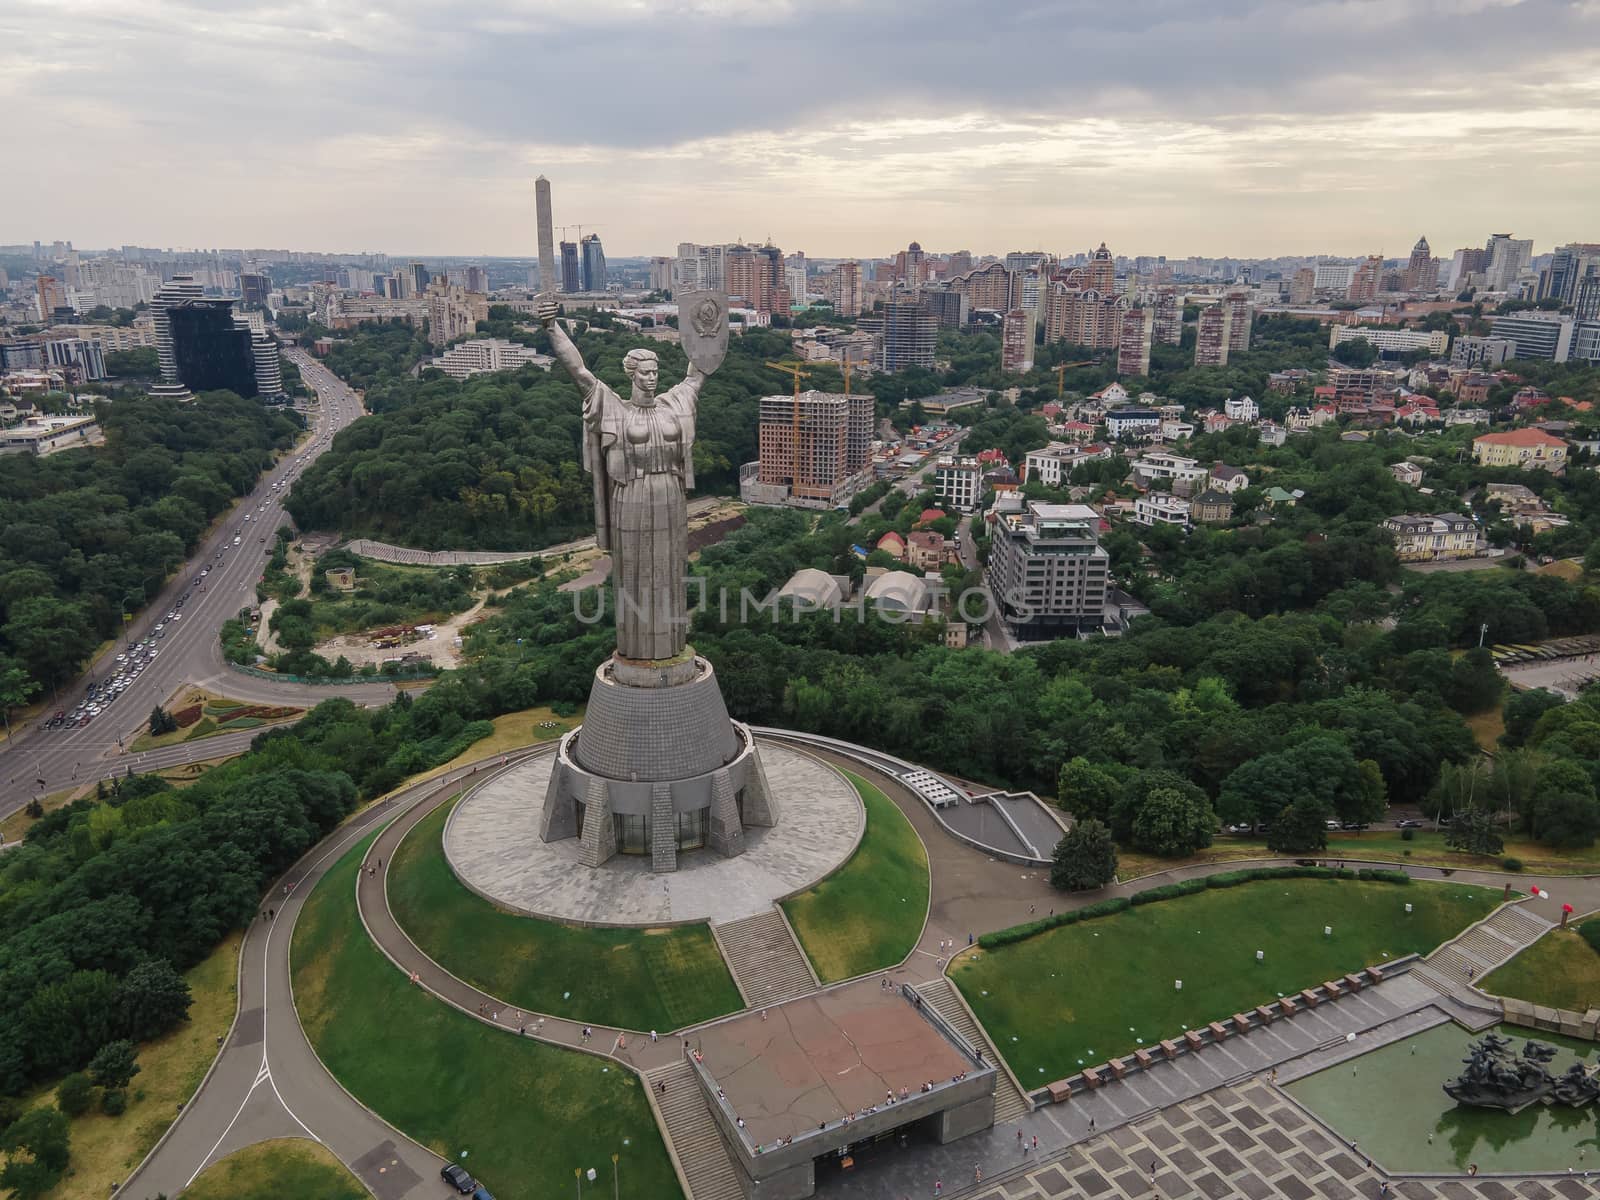 Kyiv, Ukraine : Aerial view of the Motherland Monument